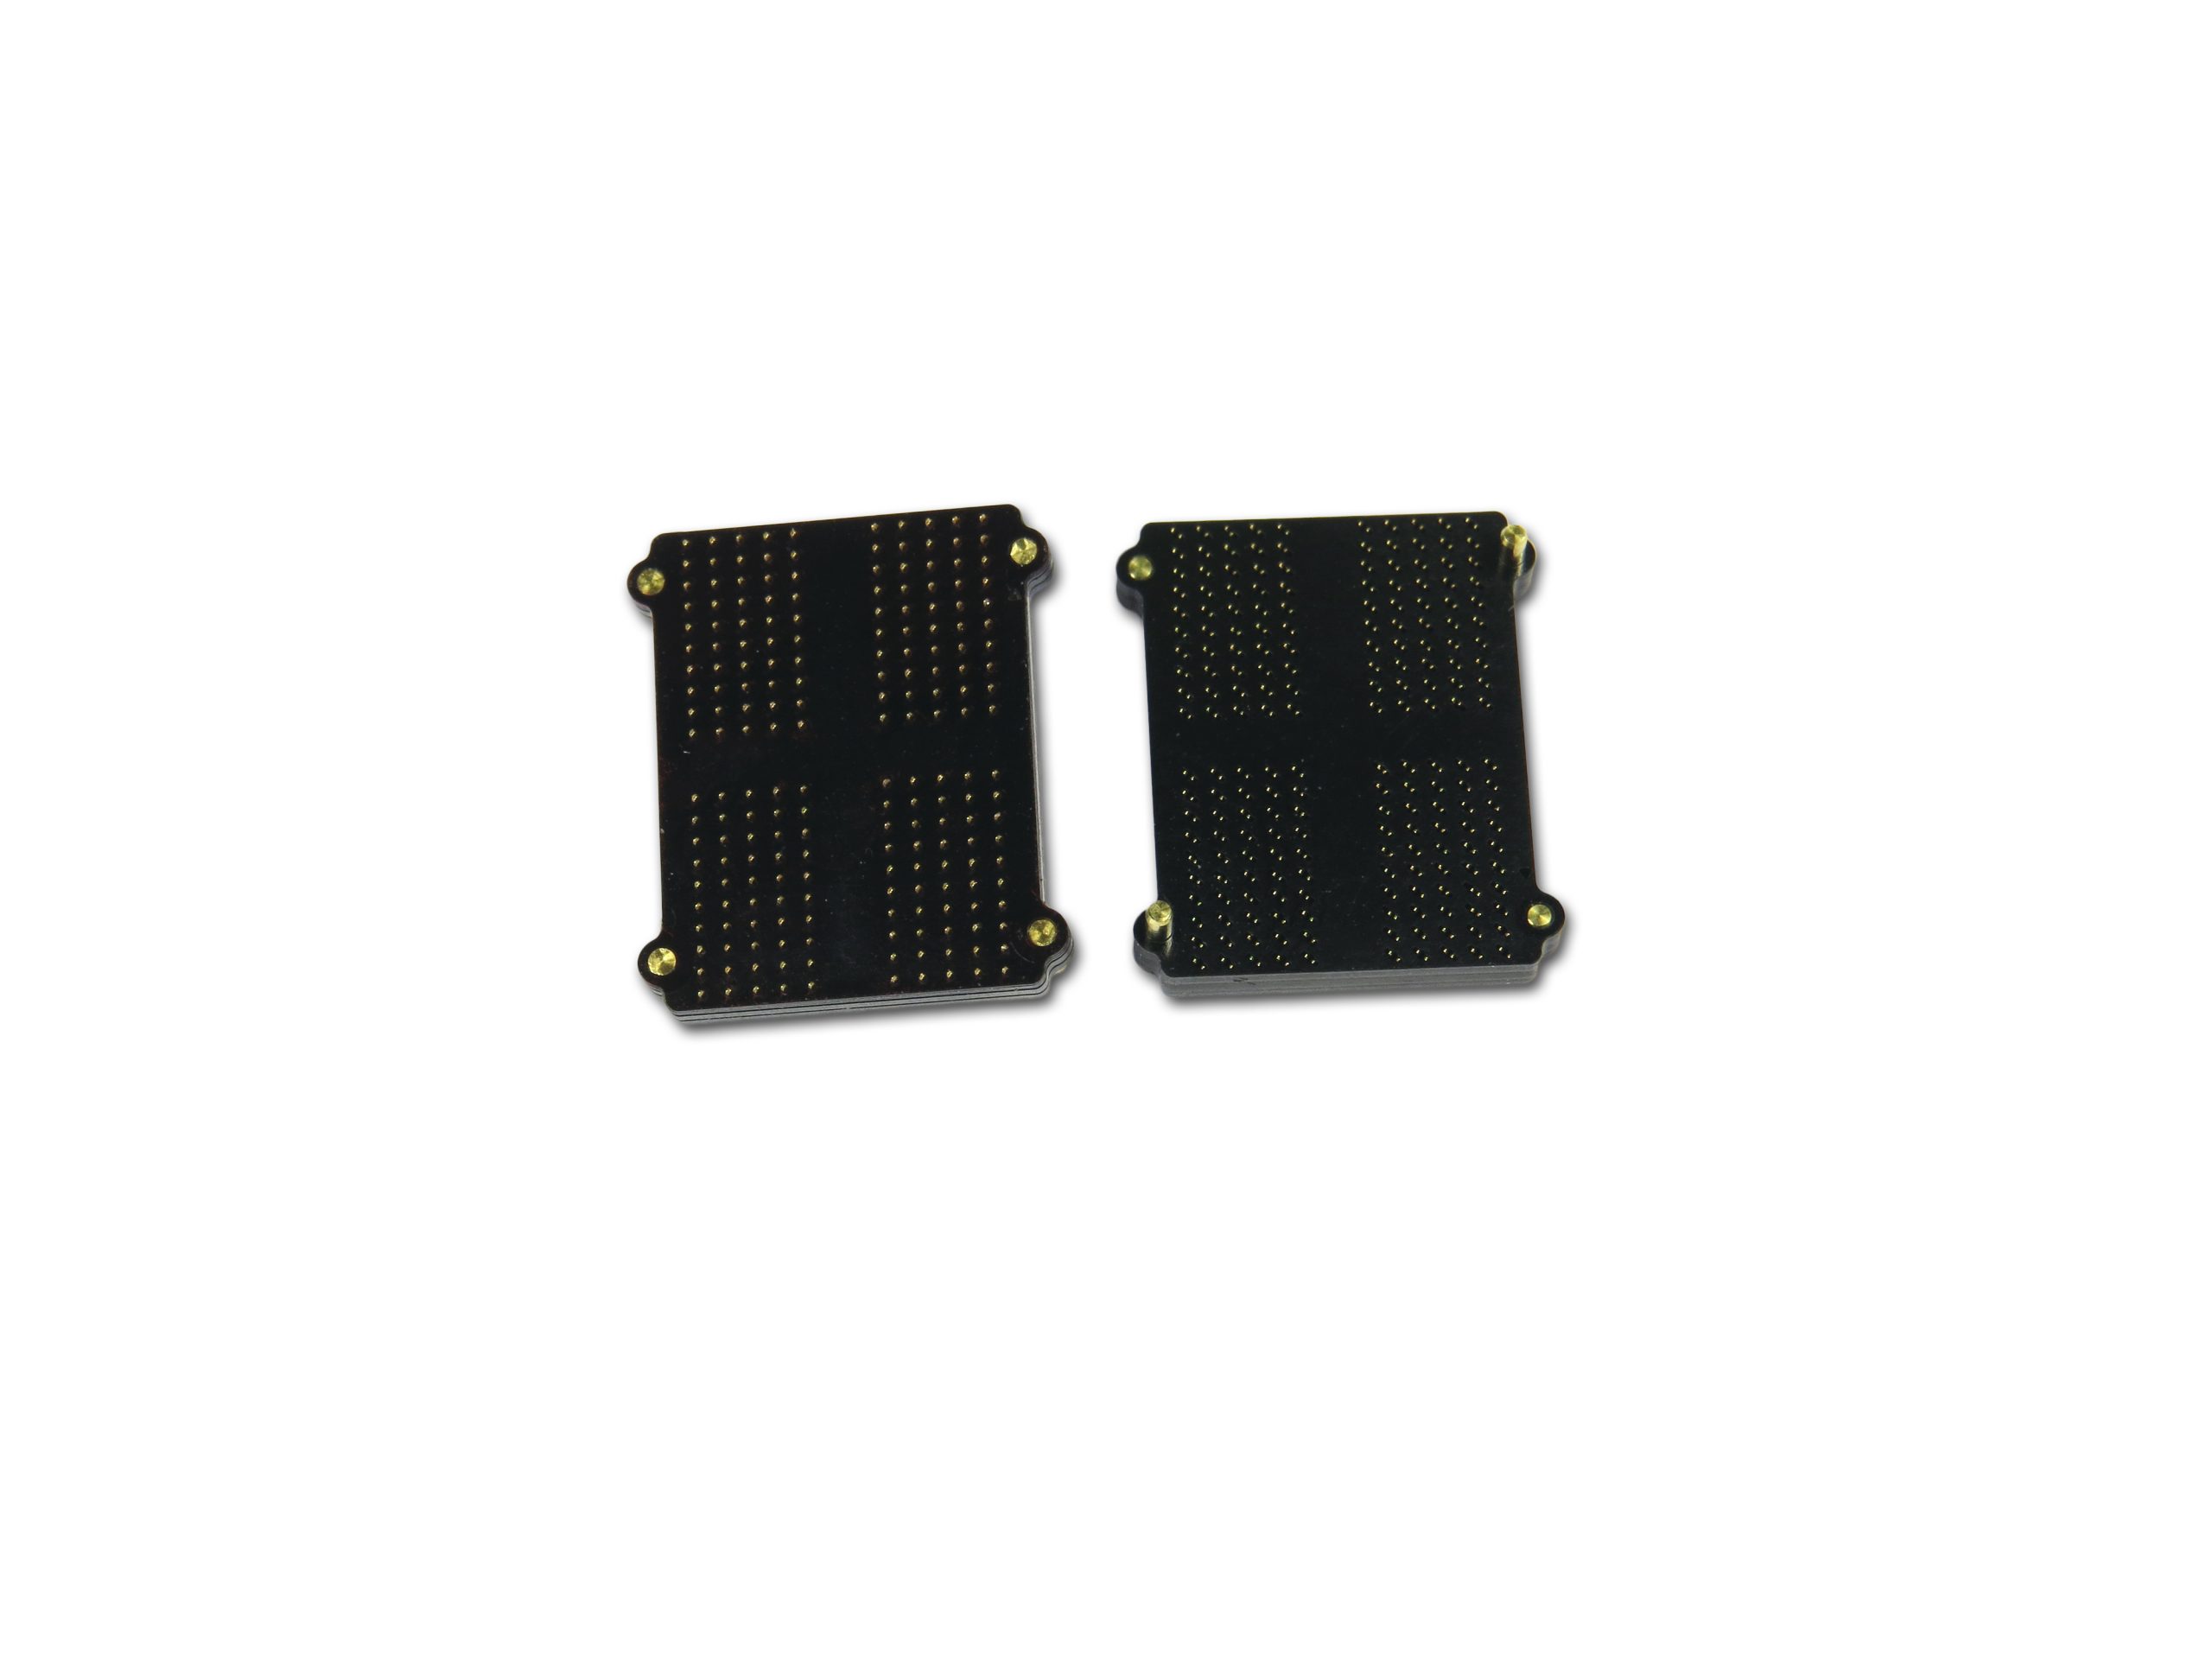 Chip Size 0.65mm Pitch BGA Socket Adapter for DDR4